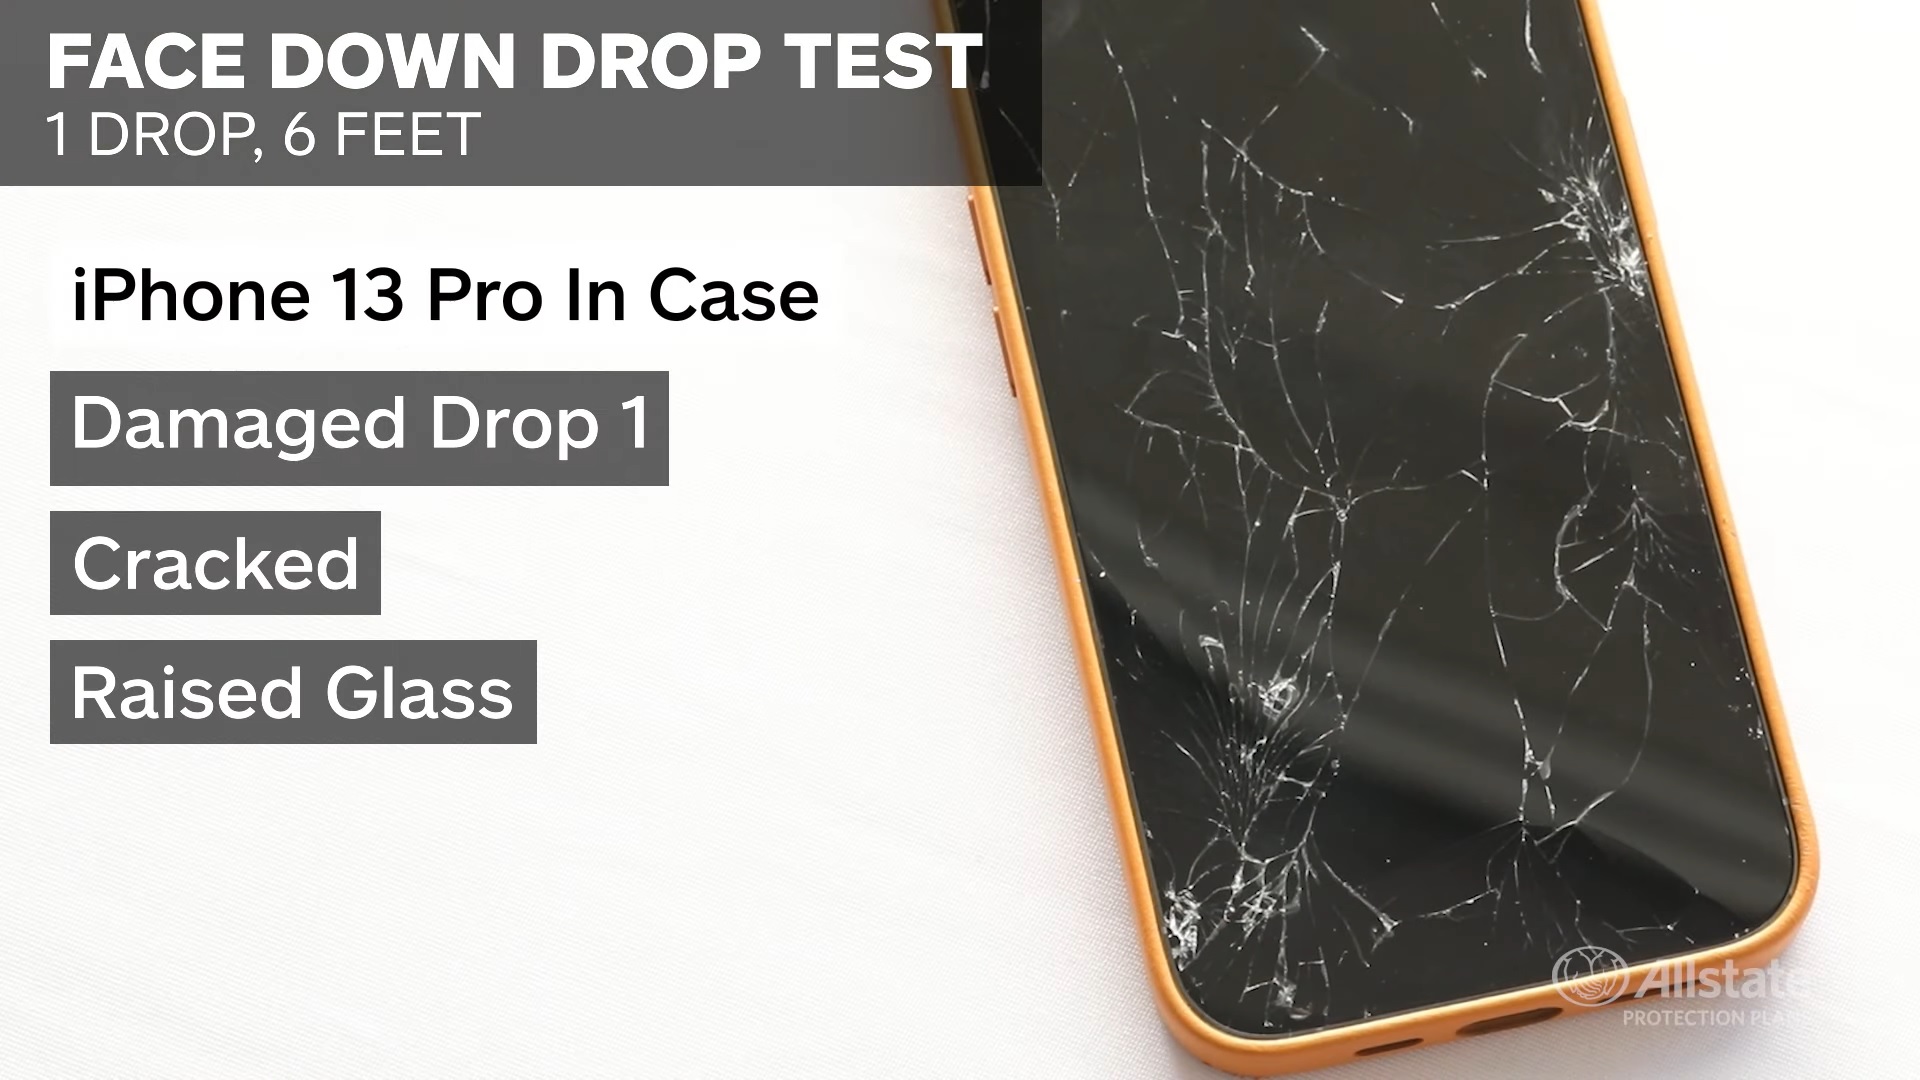 Iphone 13 Drop Test Results Shatters Expectations Laptop Mag